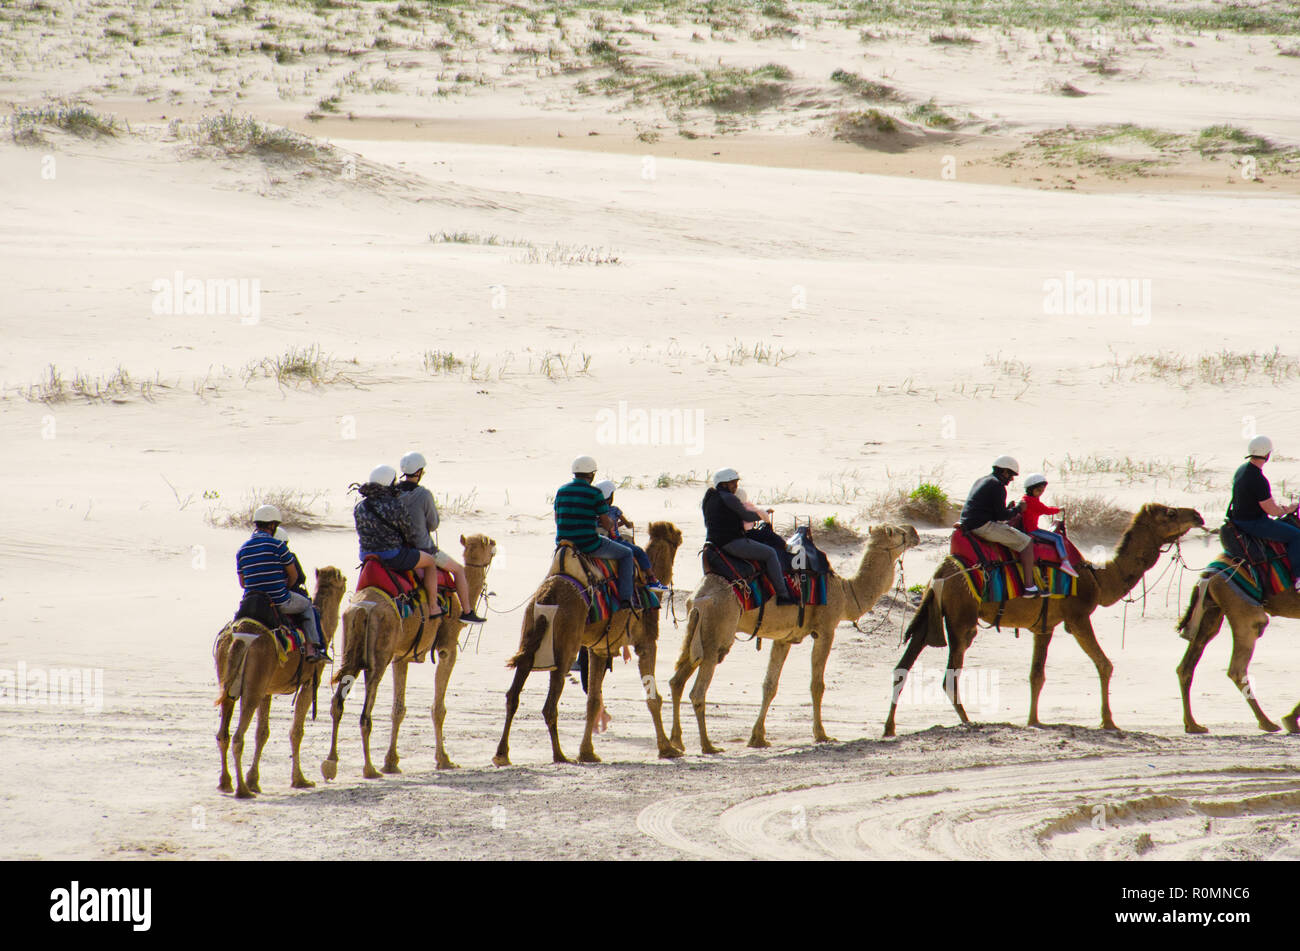 People riding camels  a popular tourist activity on the largest moving sand dunes in Australia on Stockton Beach near Port Stephens. Stock Photo